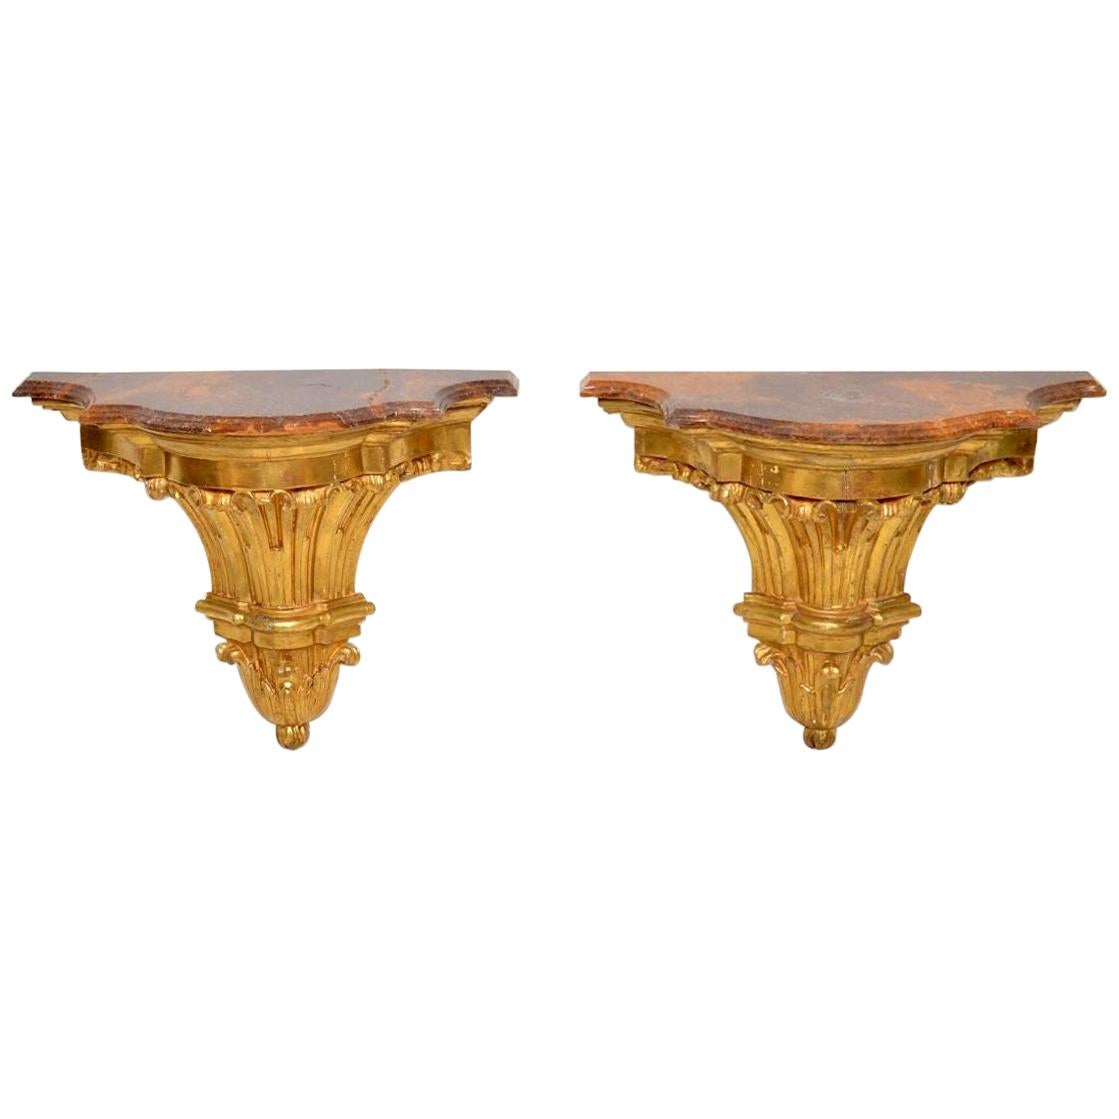 Pair of Antique French Giltwood and Marble Wall Mounting Side Tables